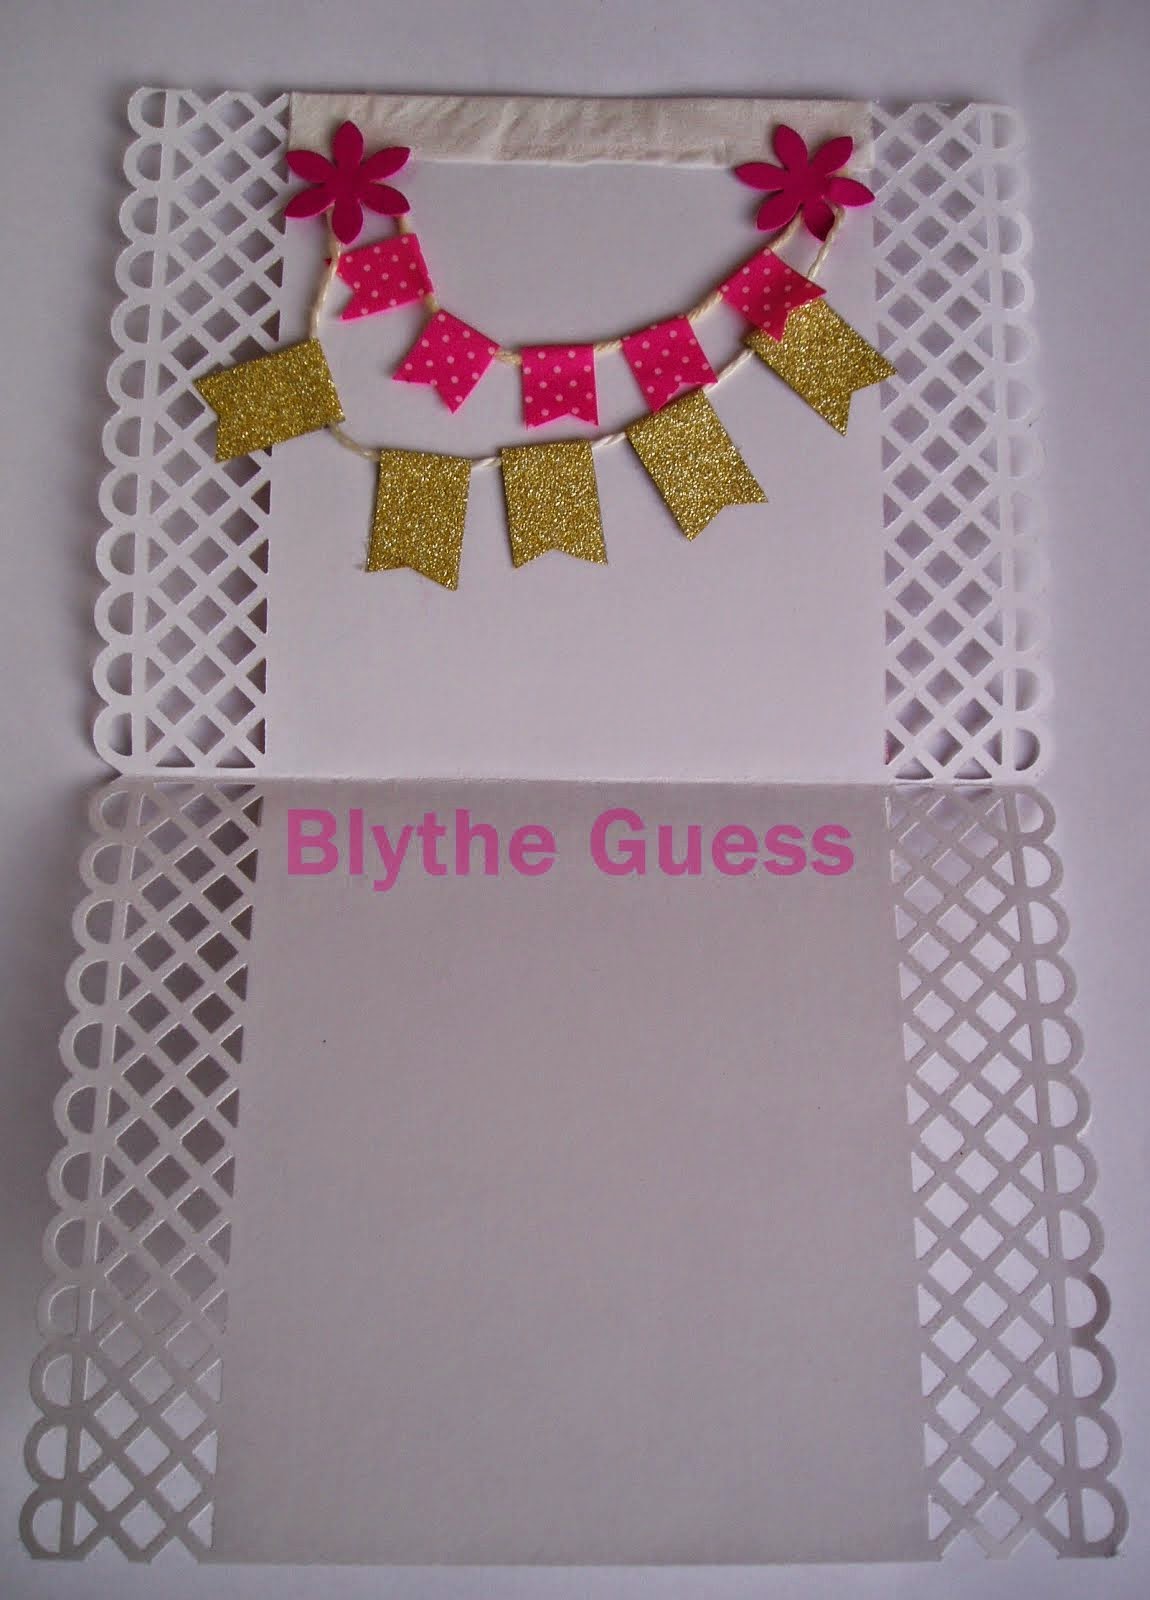 by Blythe Guess